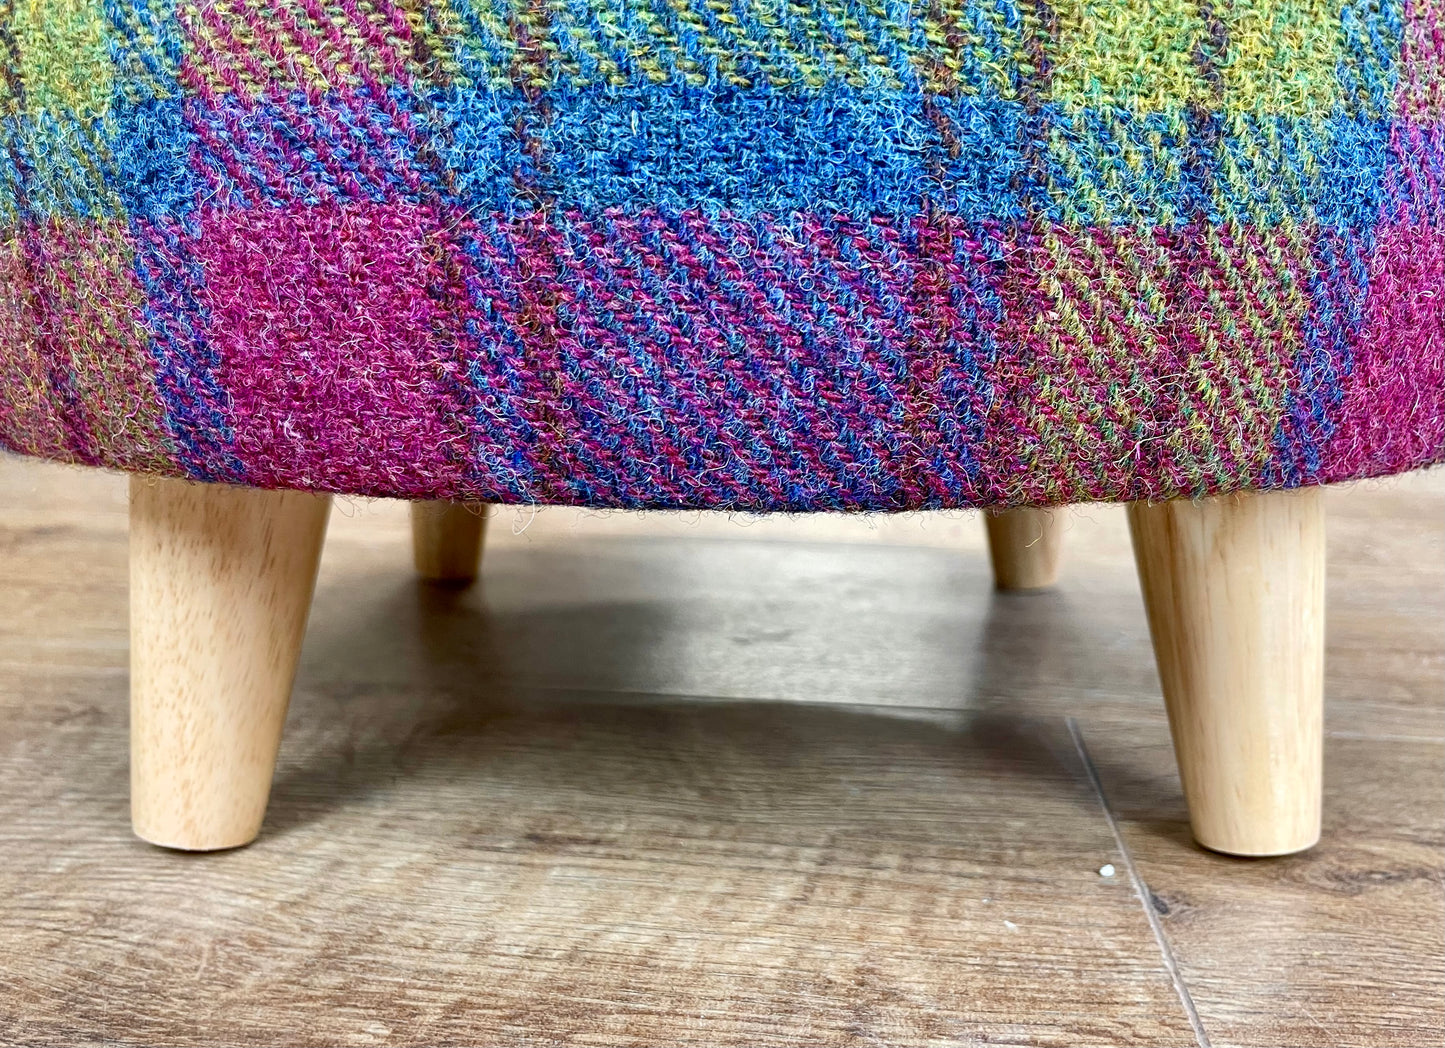 Colourful Harris Tweed Chunky Footstool with Fuchsia Piping Detail